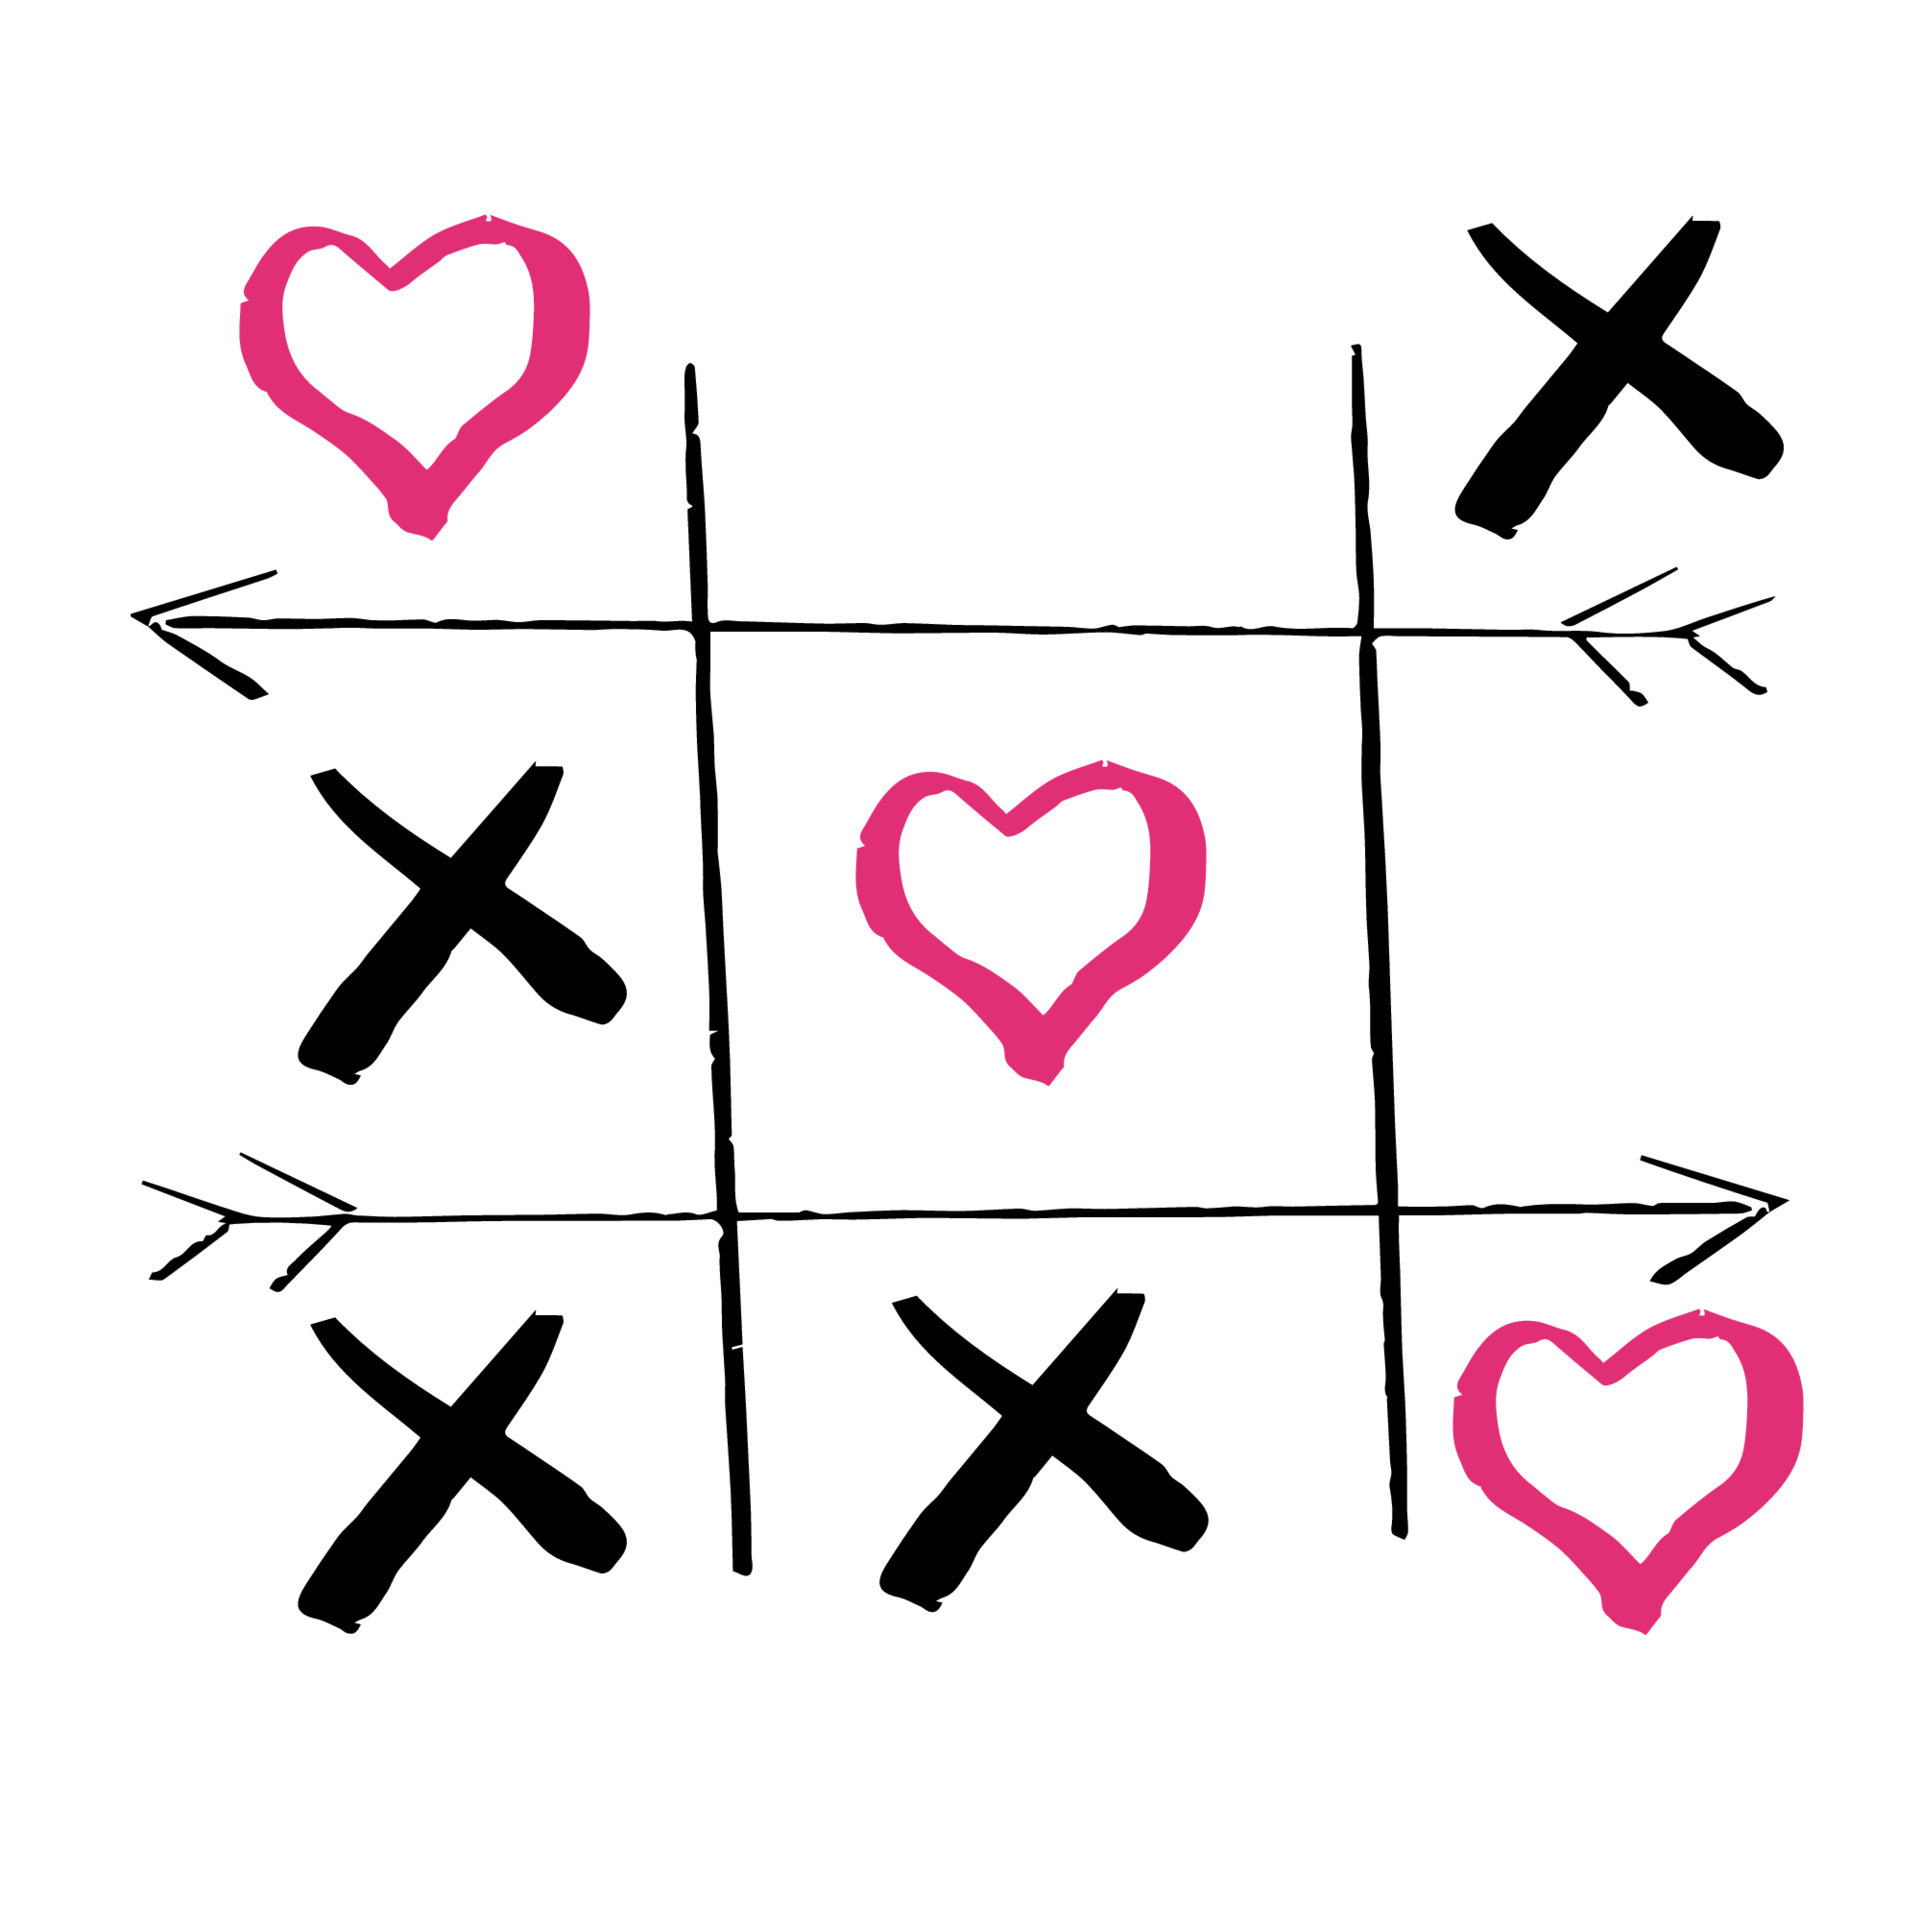 Tic-tac-toe game with hearts and crosses Vector Image